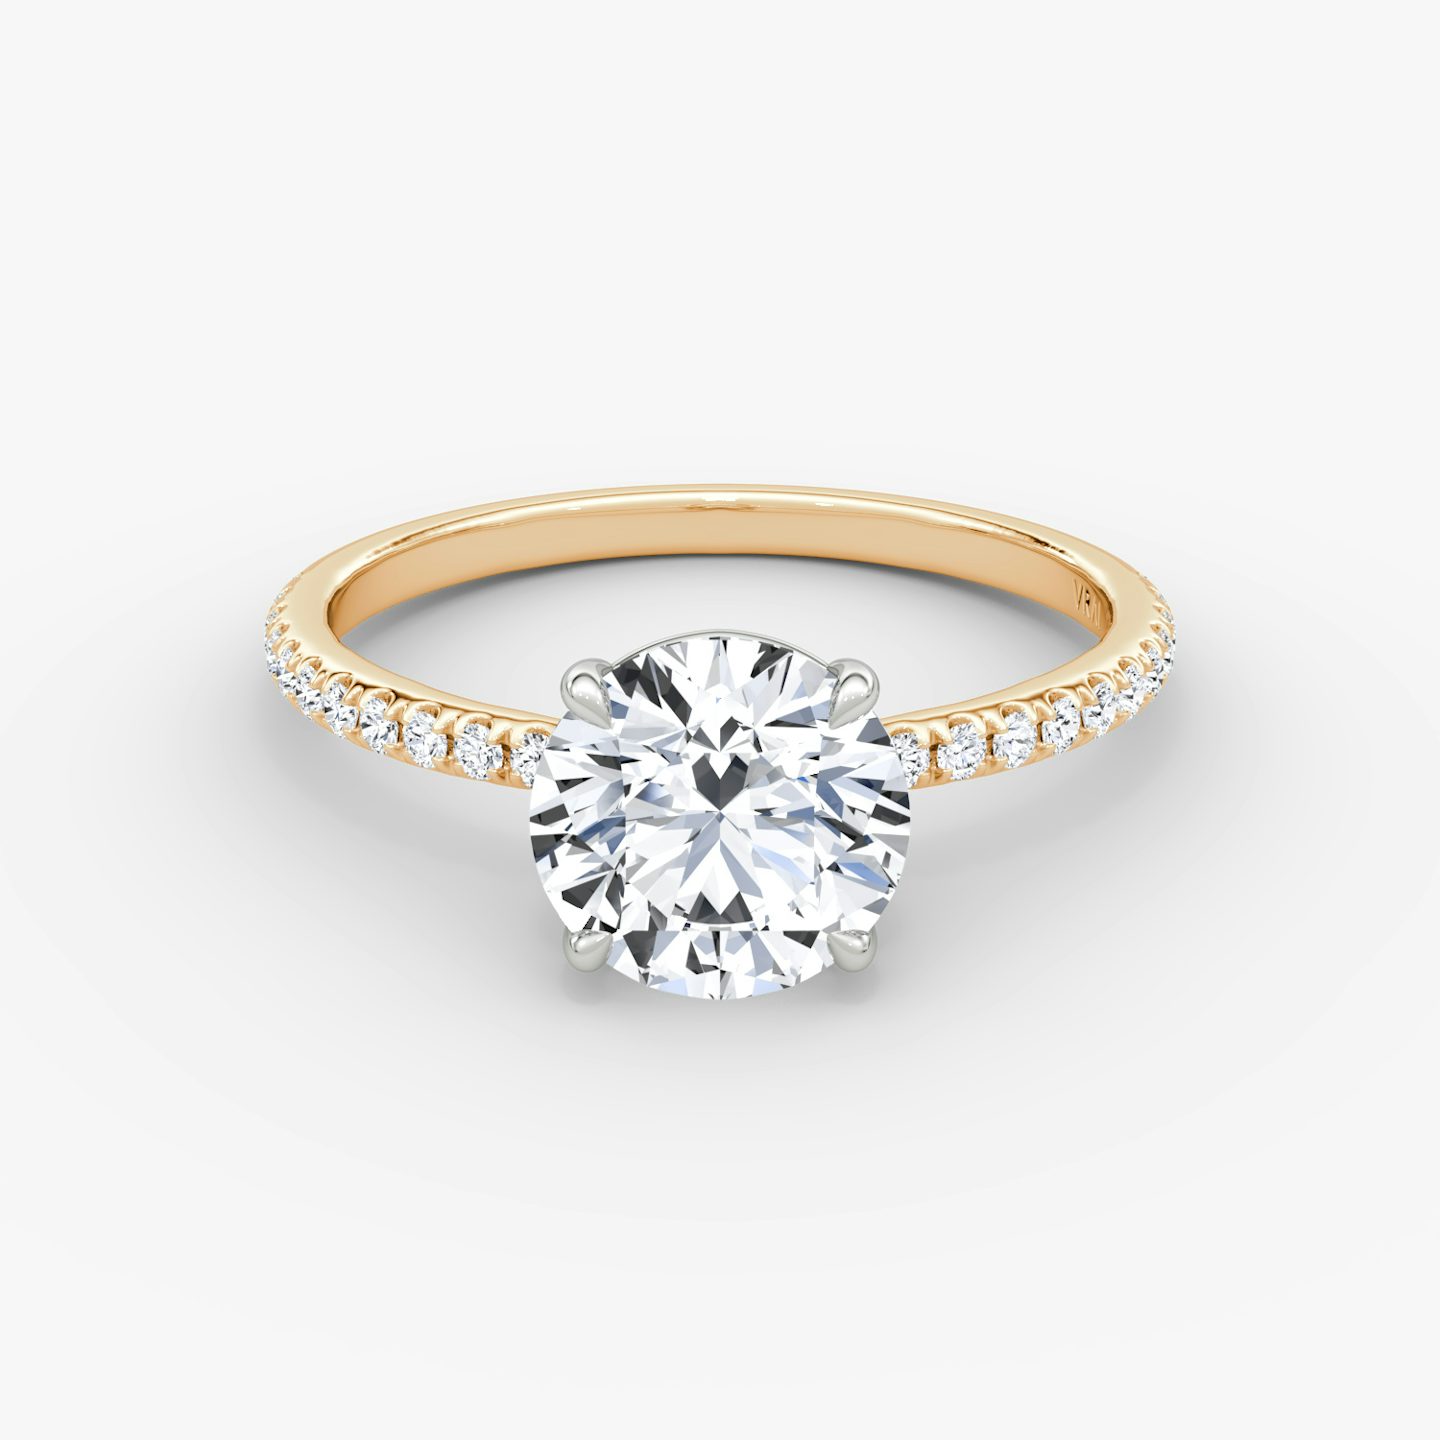 The Signature | Round Brilliant | 14k | 14k Rose Gold and Platinum | Band: Pavé | Band width: Standard | Carat weight: 2 | Setting style: Plain | Diamond orientation: vertical